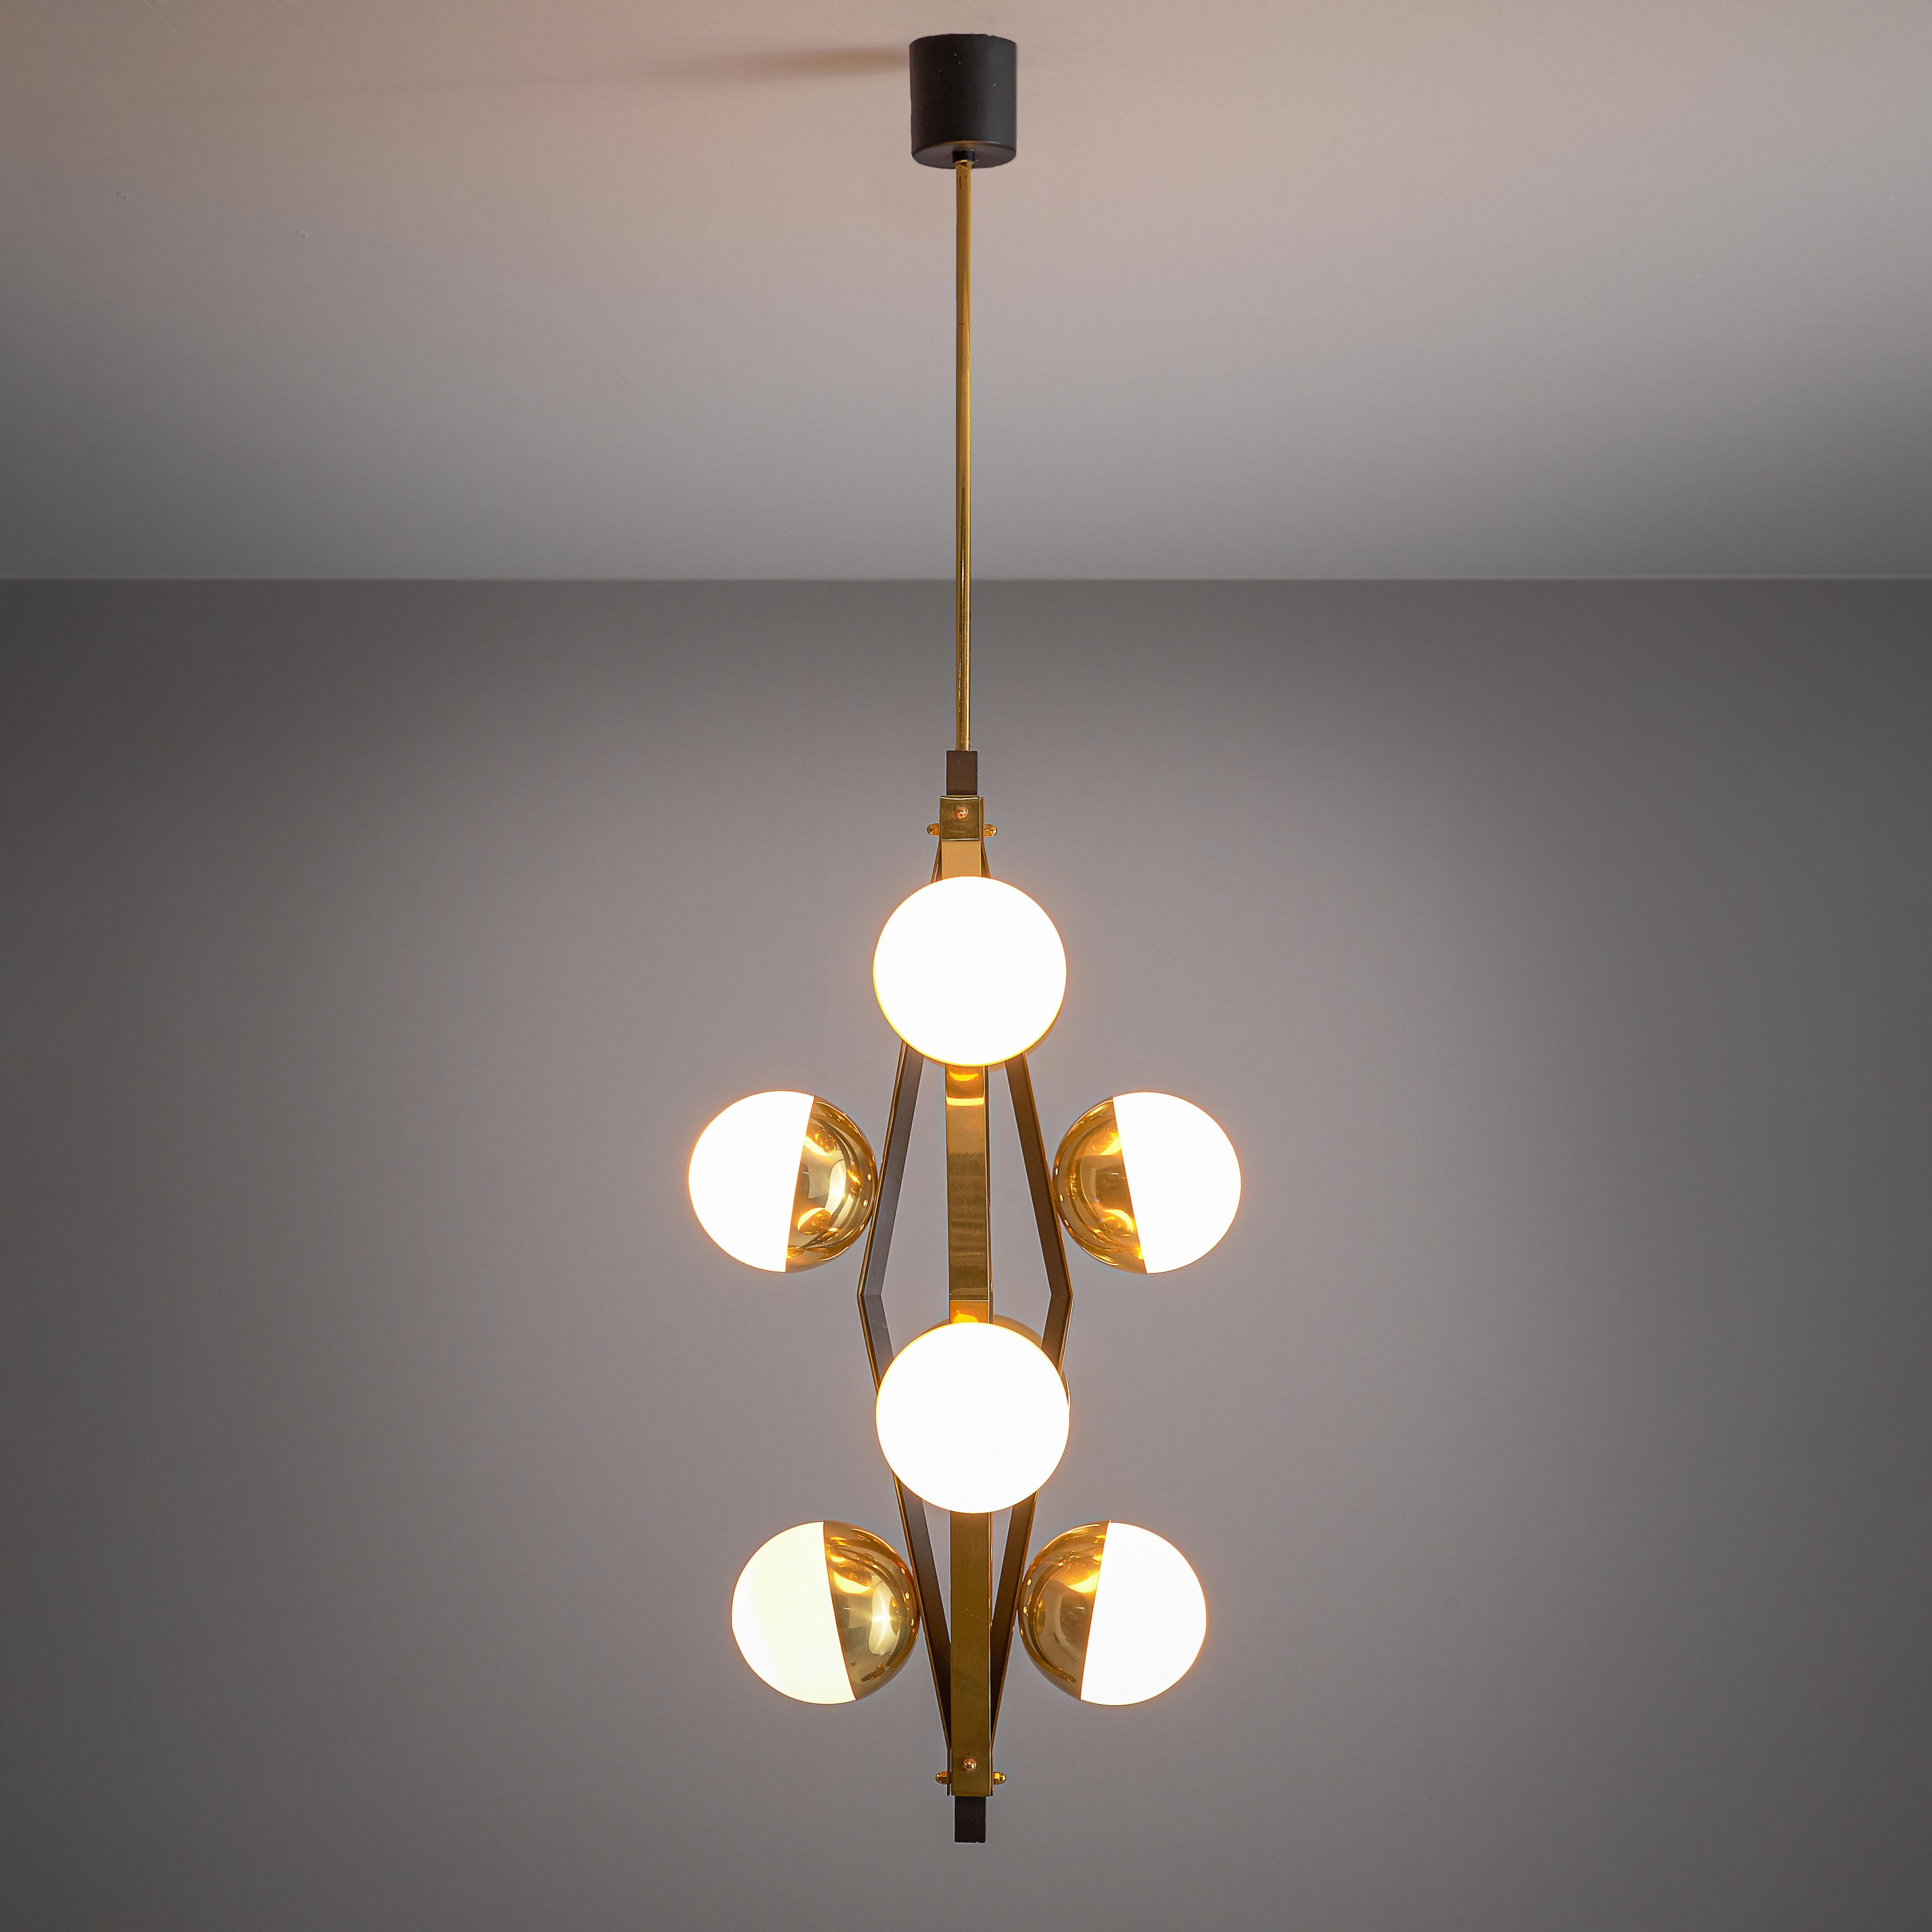 Chandelier, brass, opaline glass, Italy, 1950s

Well-designed chandelier from Italy, attributed to Stilnovo. The bulbs are held in place by semicircular brass bowls that are attached to a brass stroke. The pendant light consists of 4 strokes that